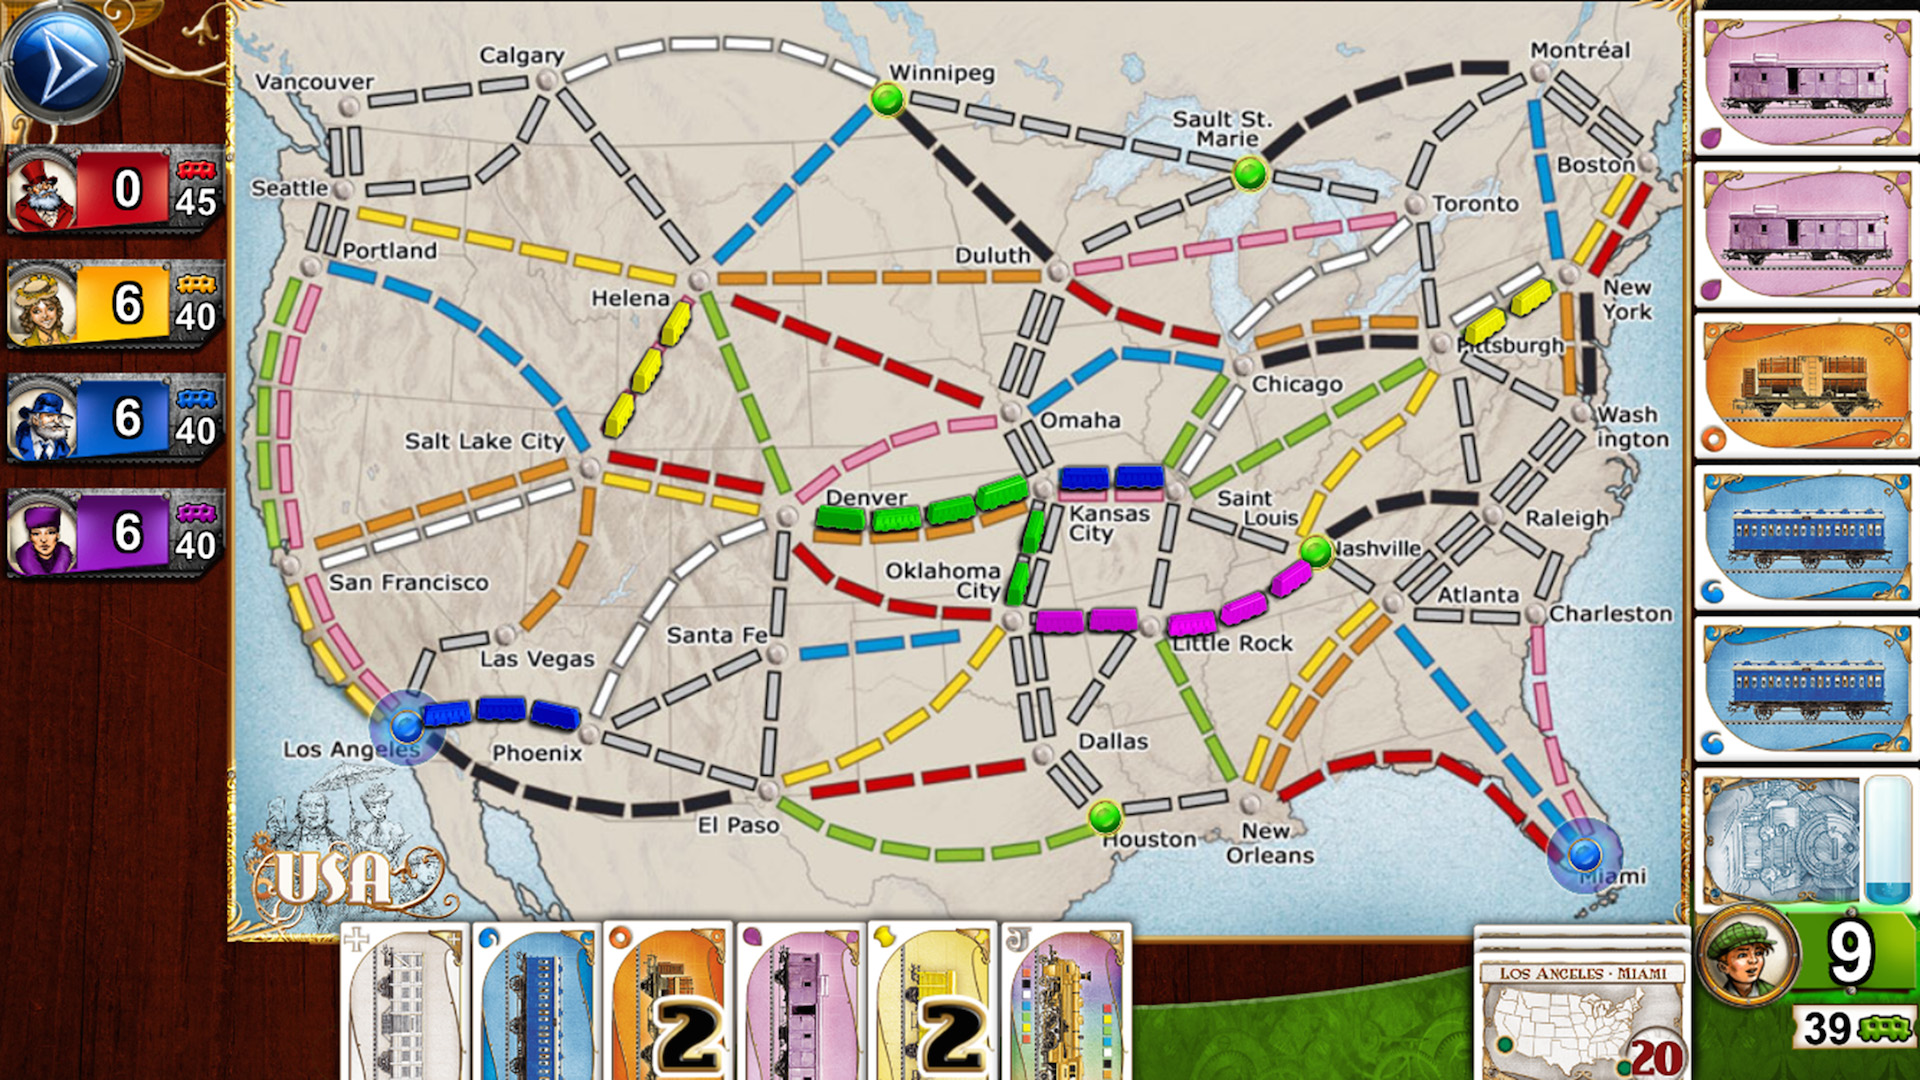 Ticket to Ride Board Game